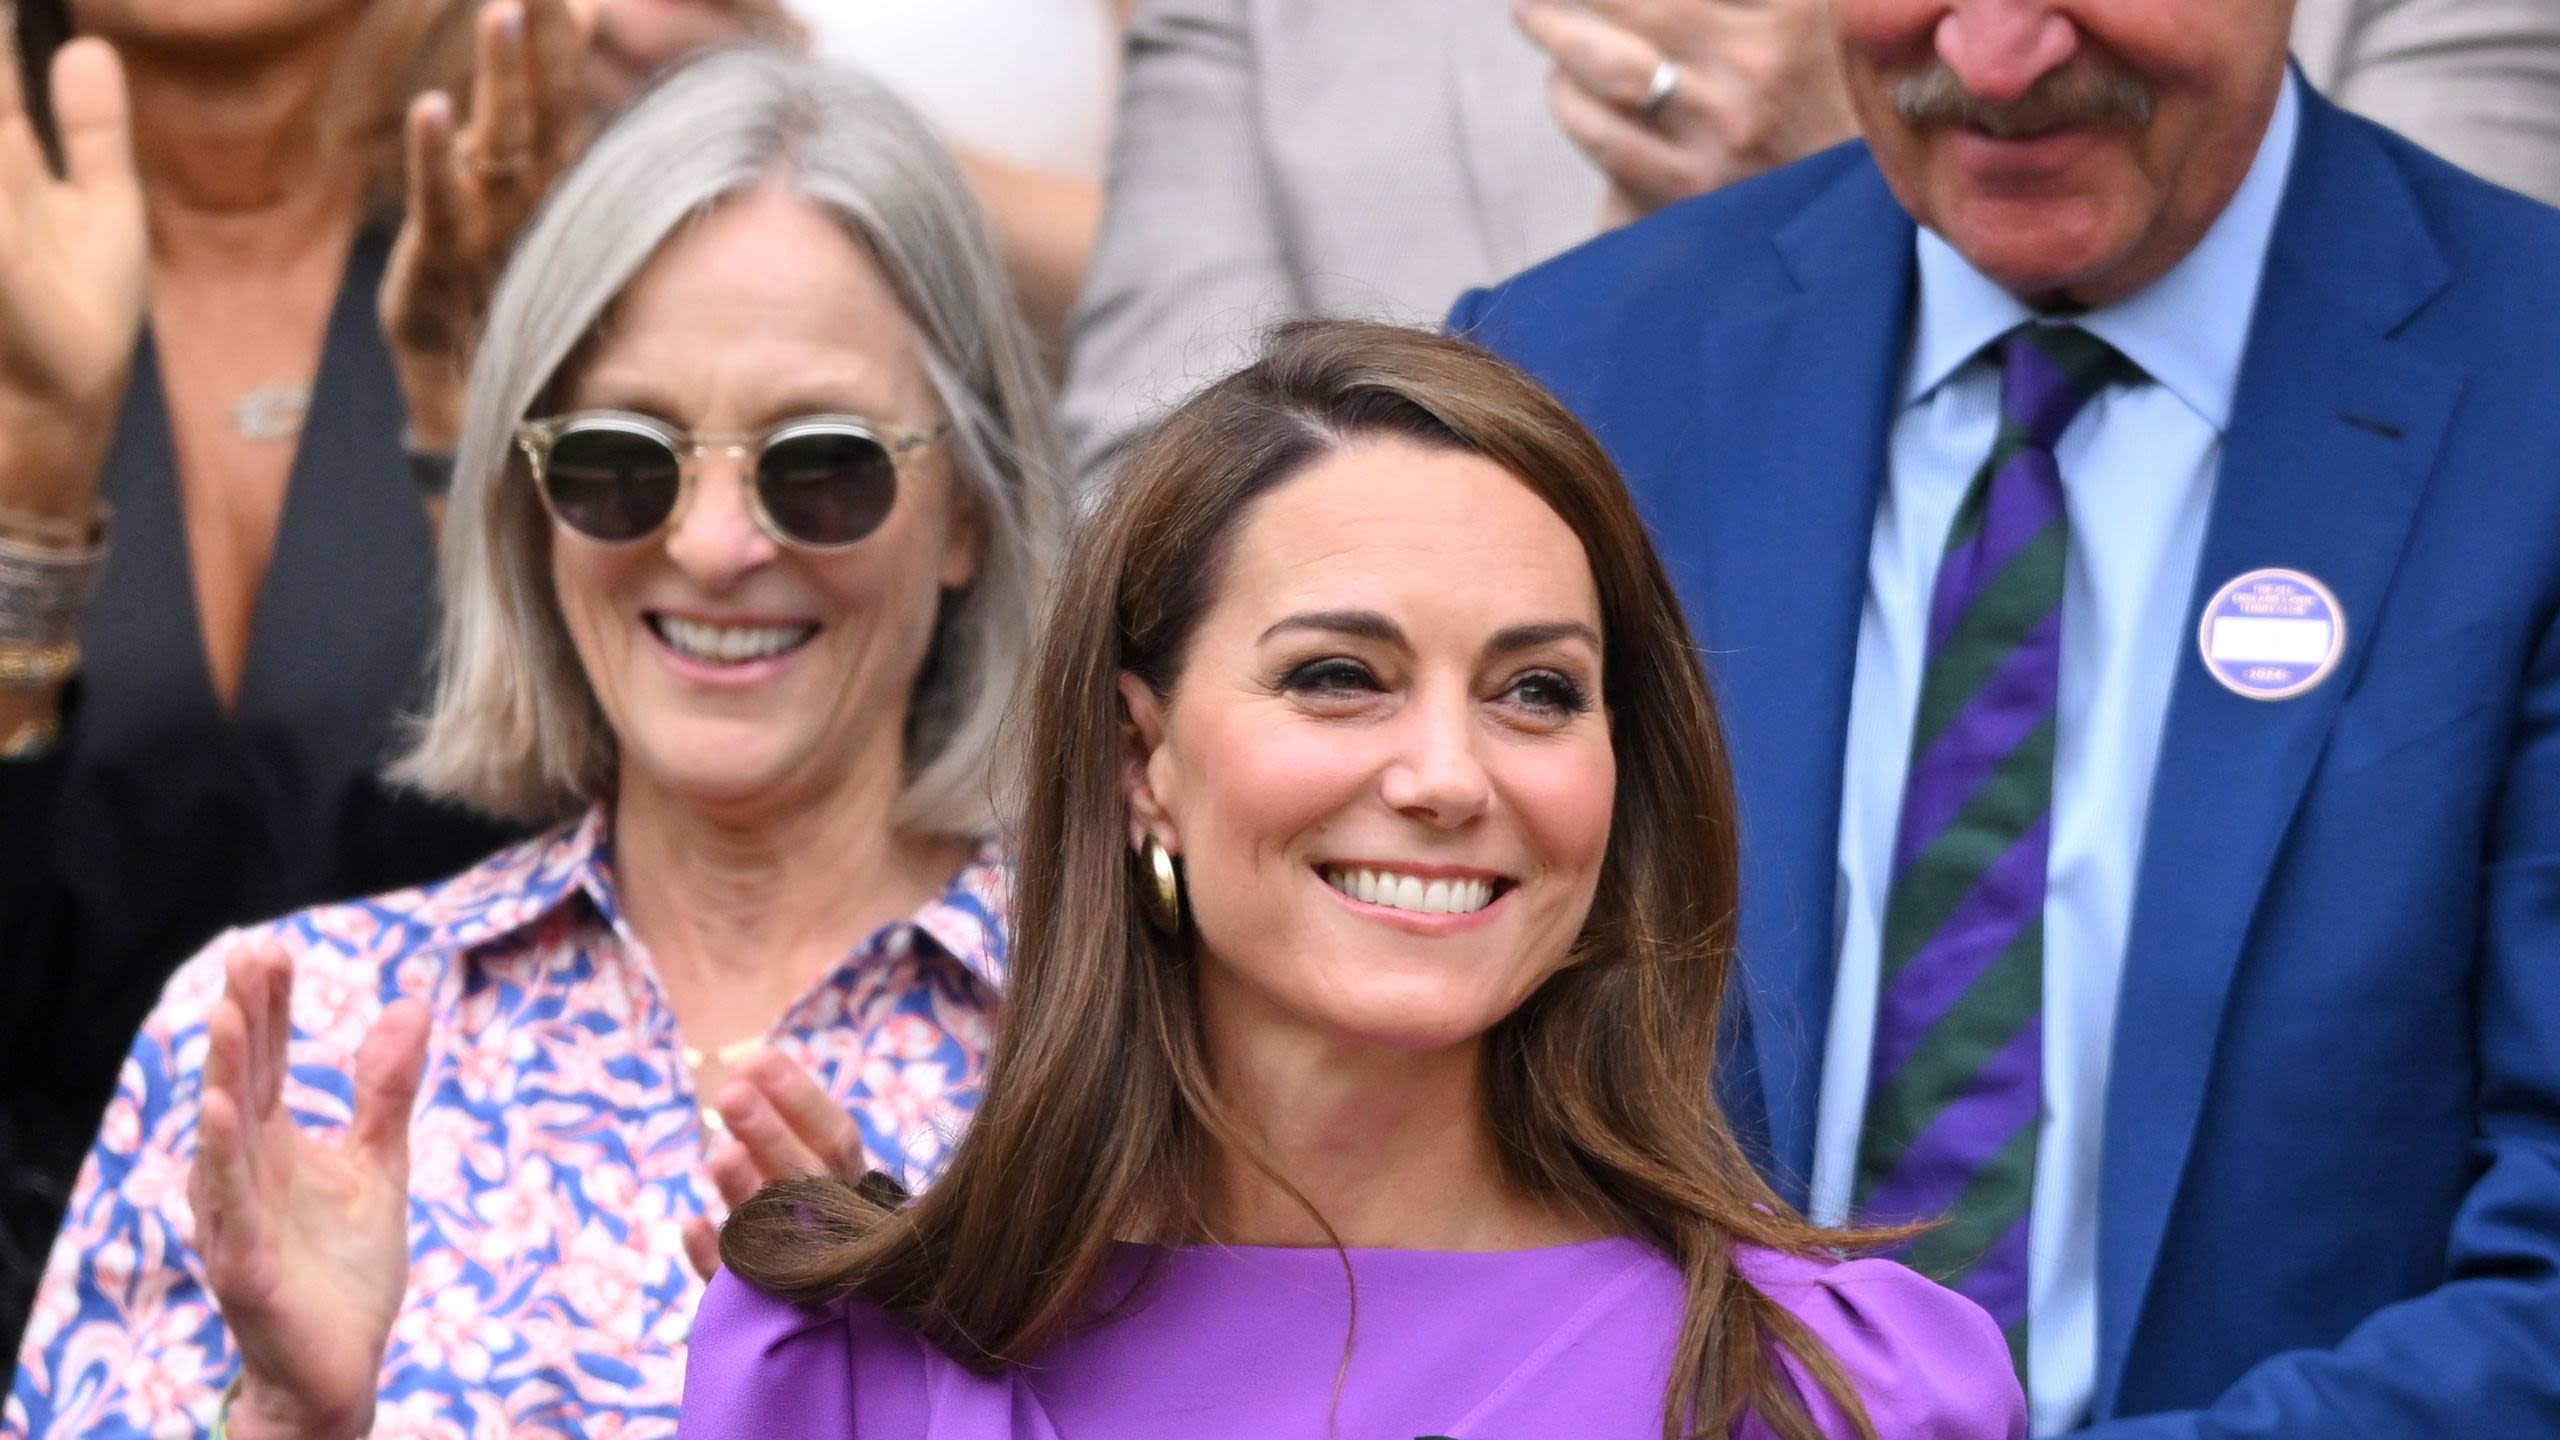 Kate Middleton Makes Rare Public Appearance at Wimbledon Finals Amid Cancer Treatment